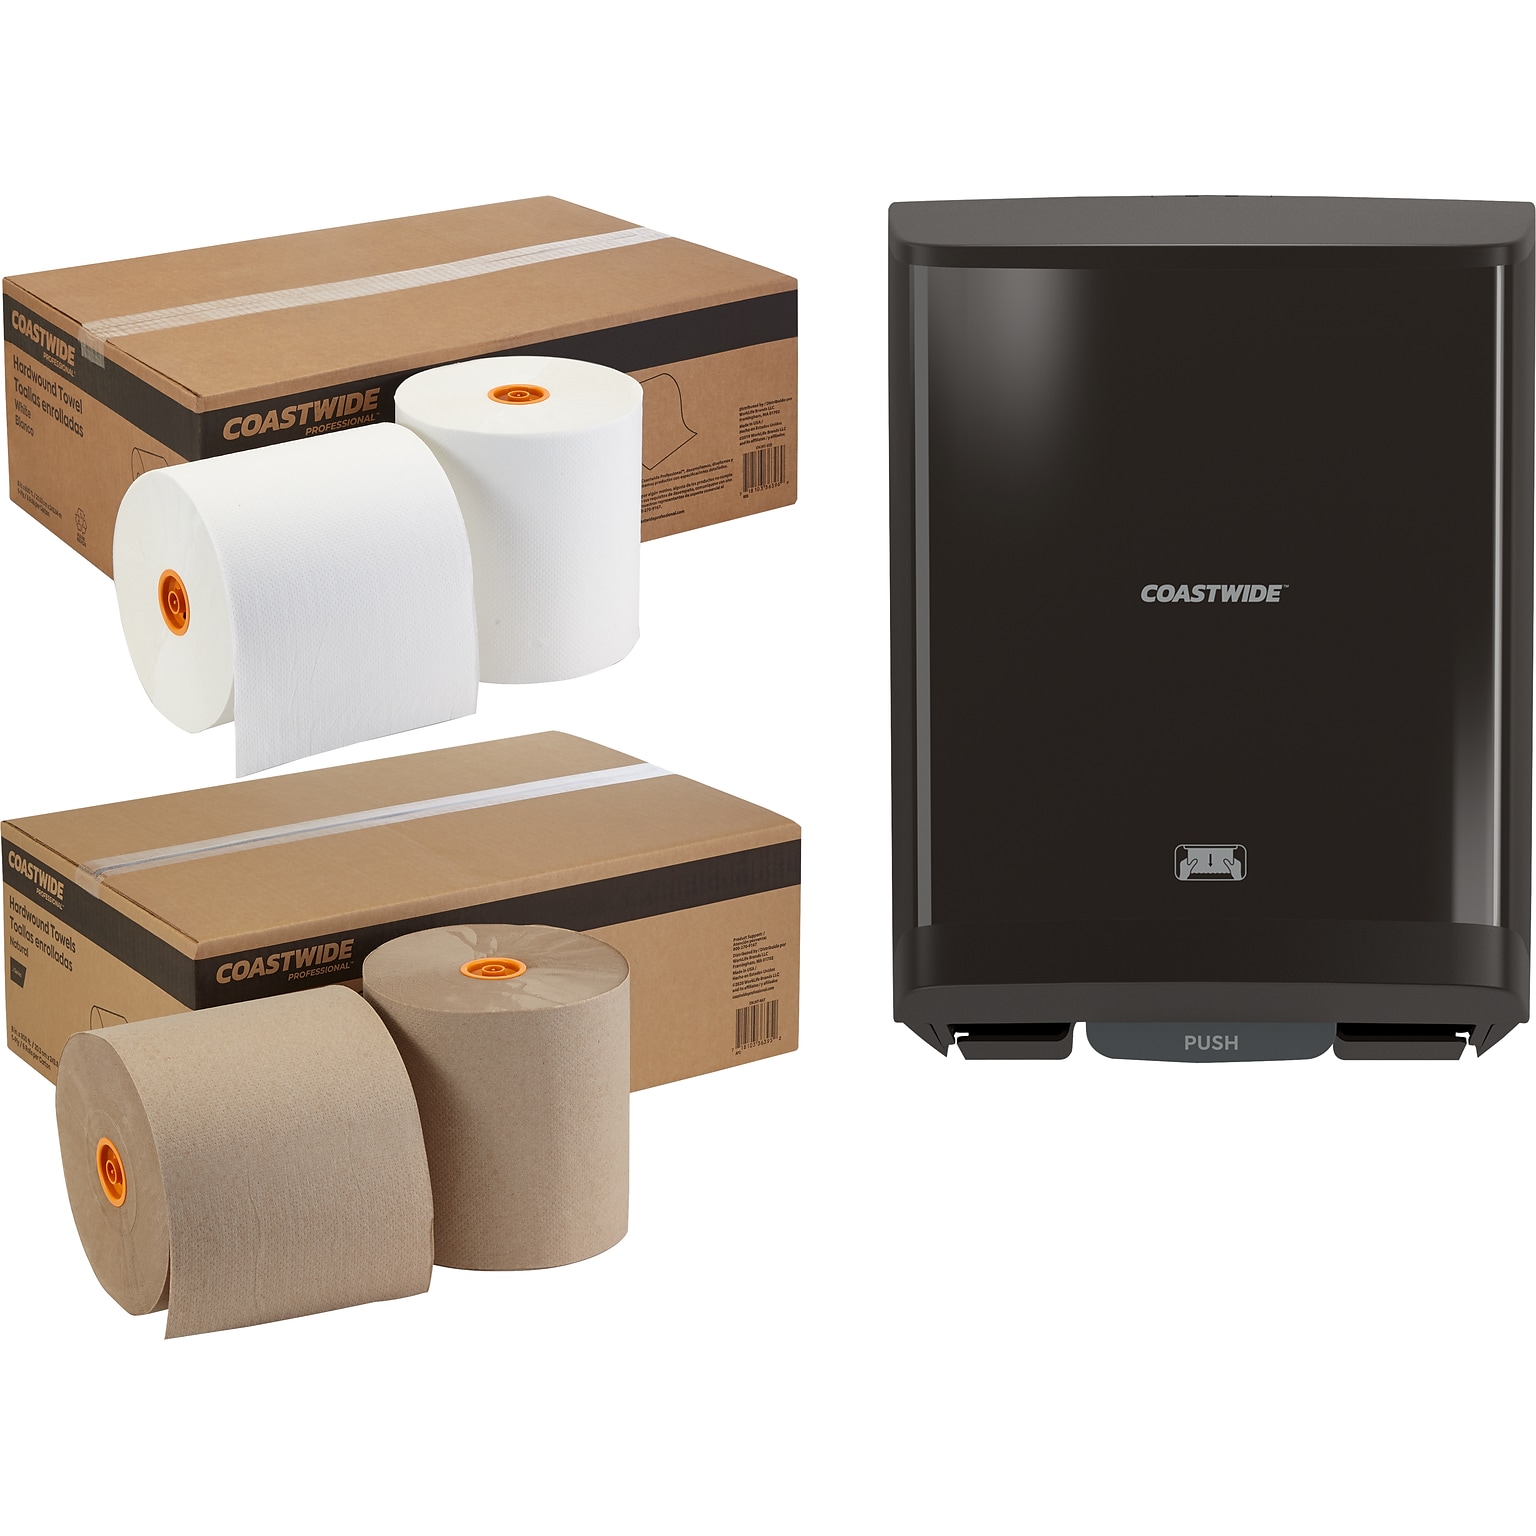 Free Coastwide Professional™ J-Series  Paper Towel Dispenser with purchase of 2 Coastwide Professional™ J-Series Towel Refills